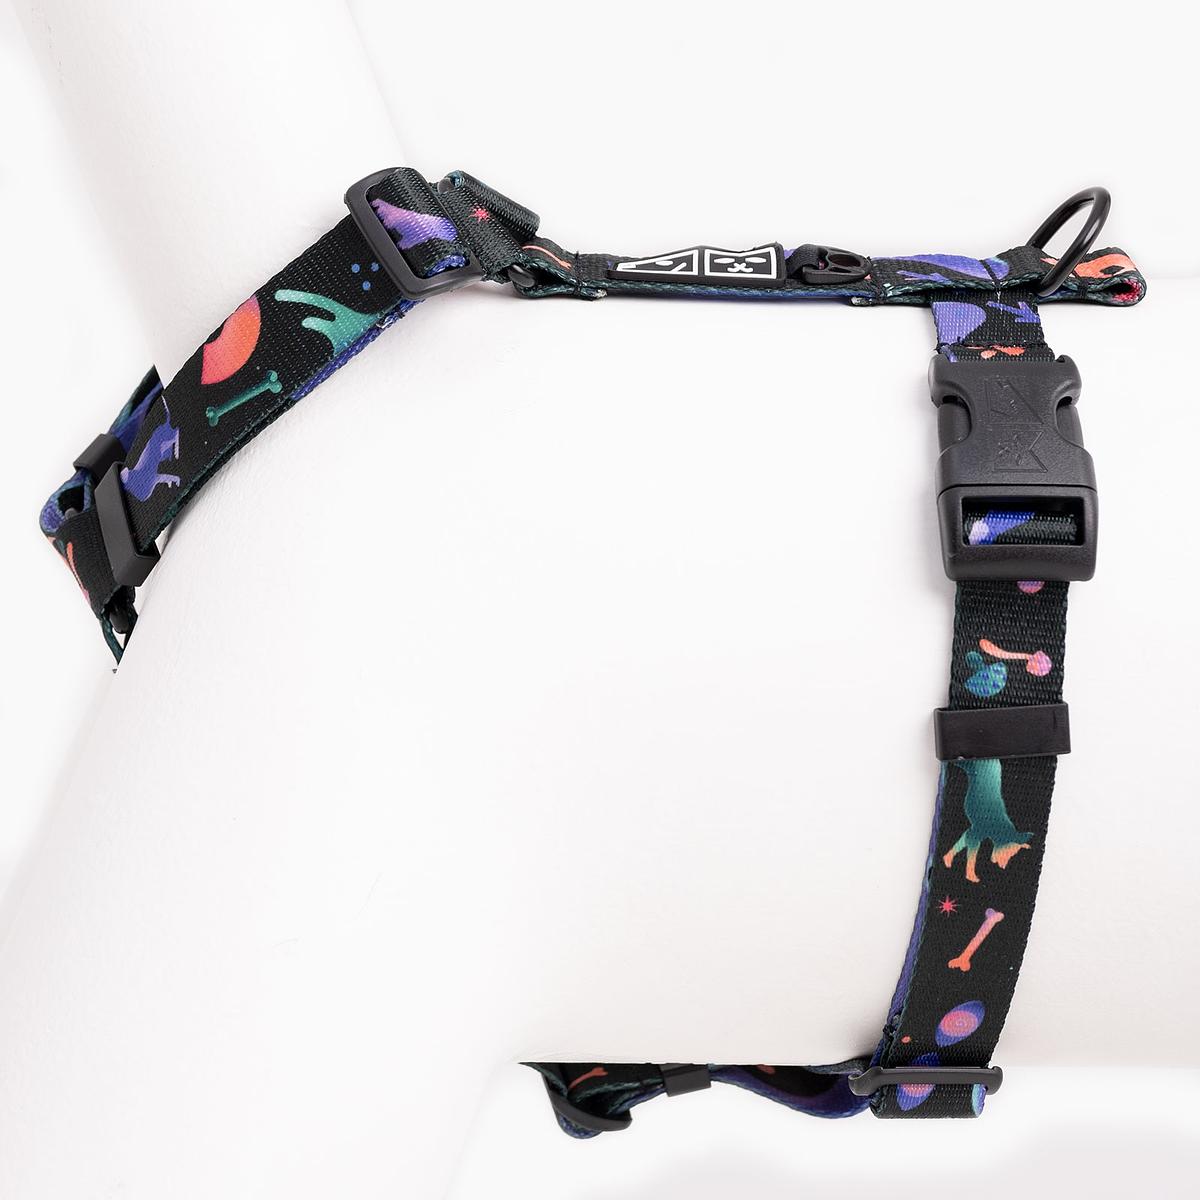 "Plsychedelic" dog or cat harness